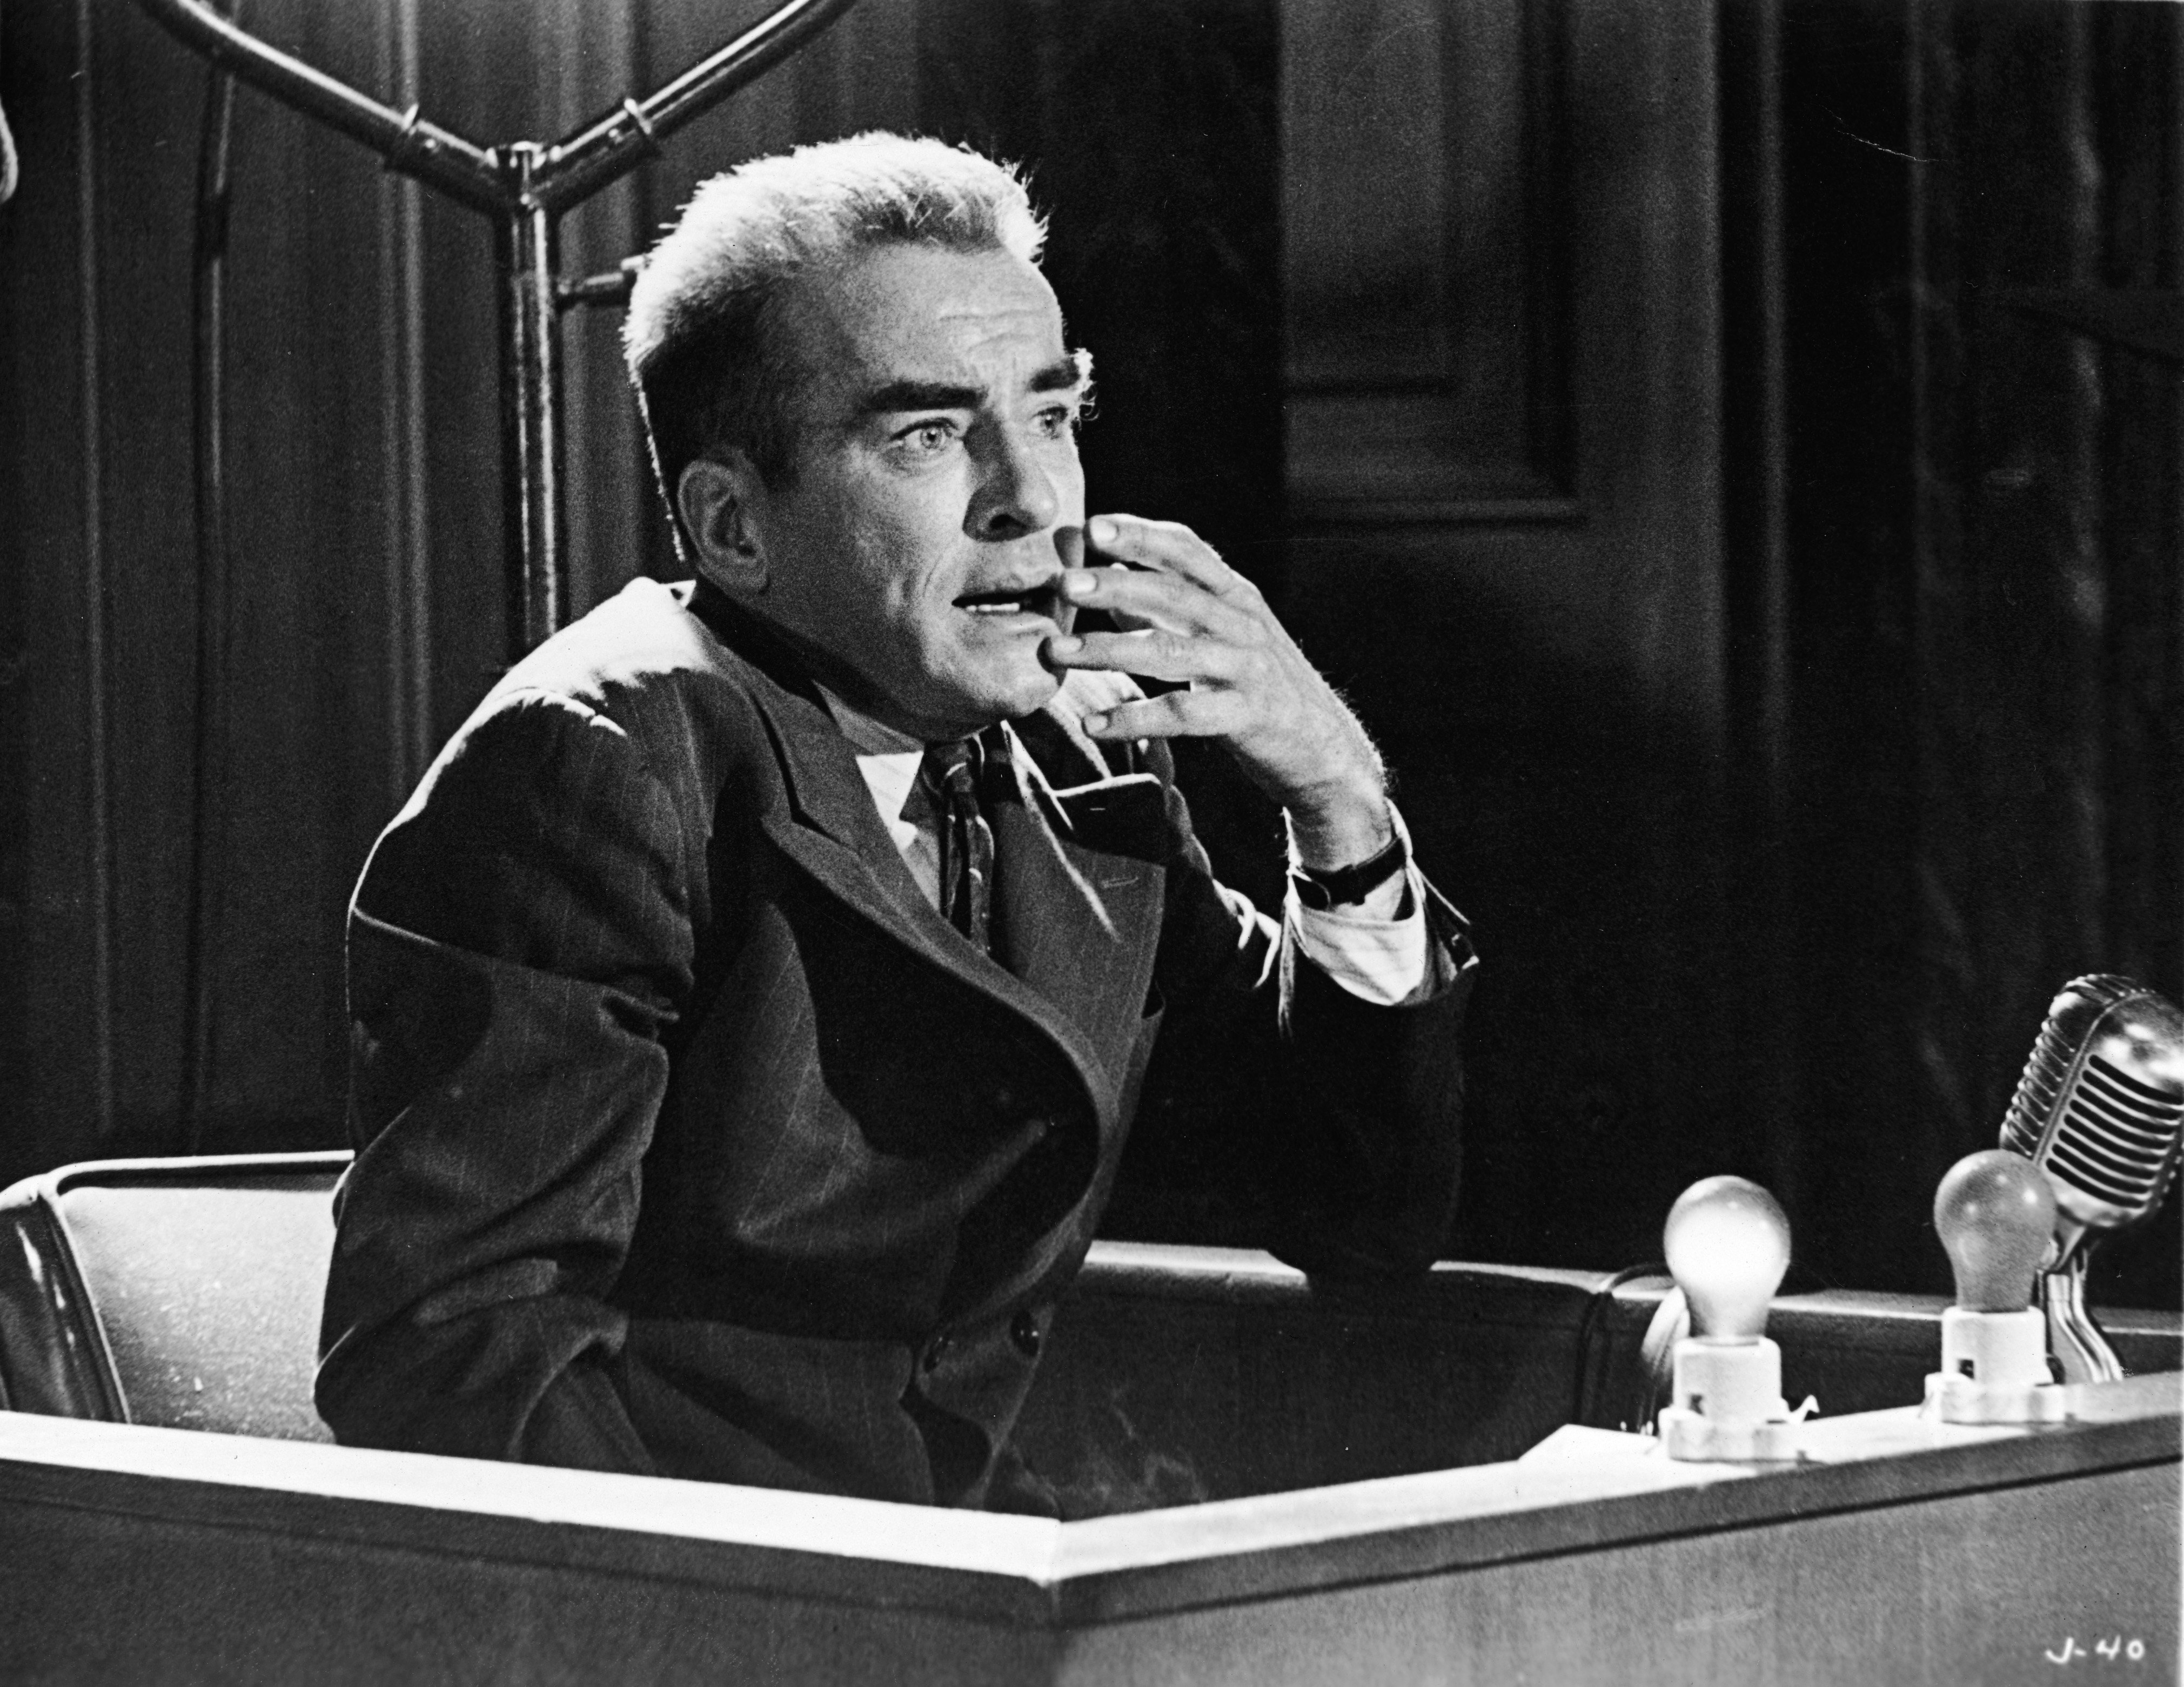 Montgomery Clift in the film "Judgment at Nuremberg" in 1961 | Photo: United Artists/Courtesy of Getty Images